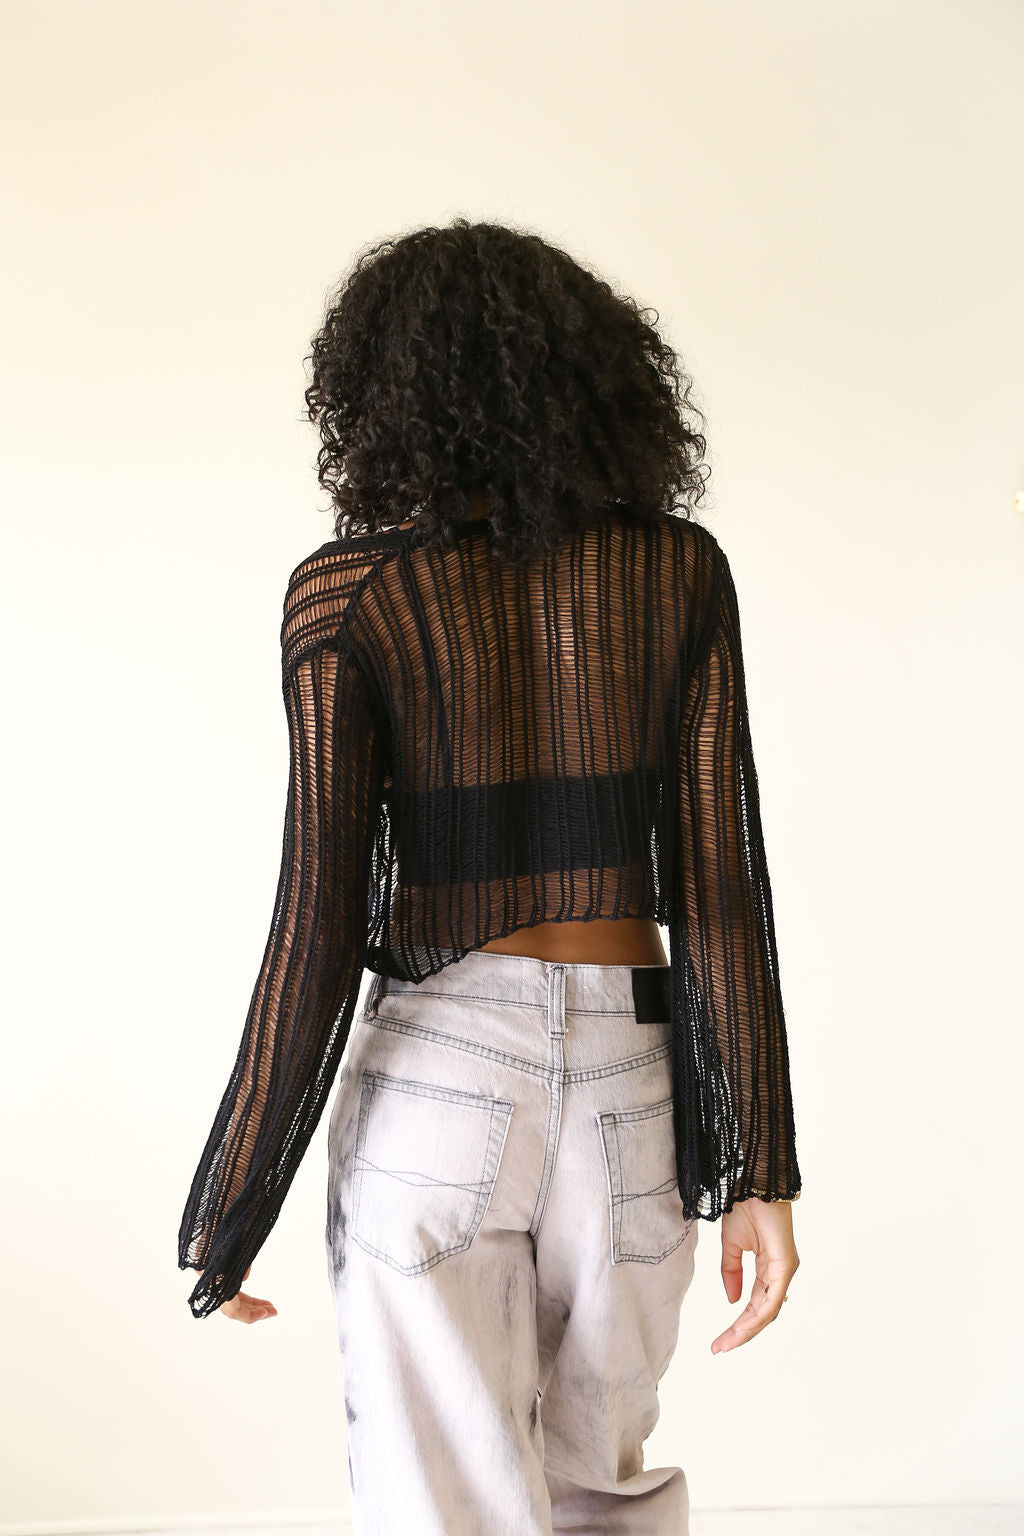 A Delight Long Sleeve Knit Crop Top